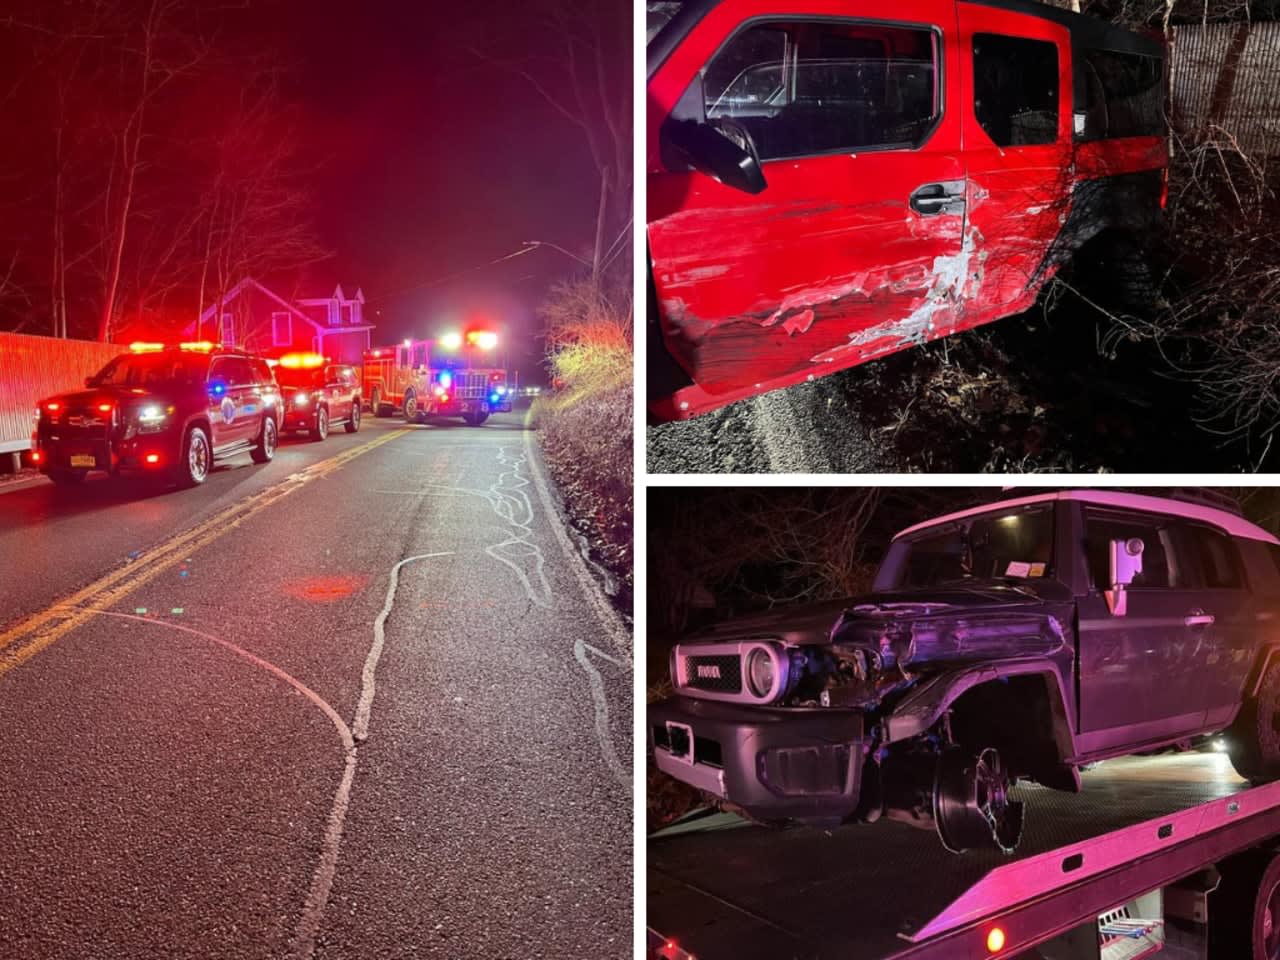 An accident in Croton Falls on Stoneleigh Avenue near the Putnam County line caused injuries and left two vehicles banged up.